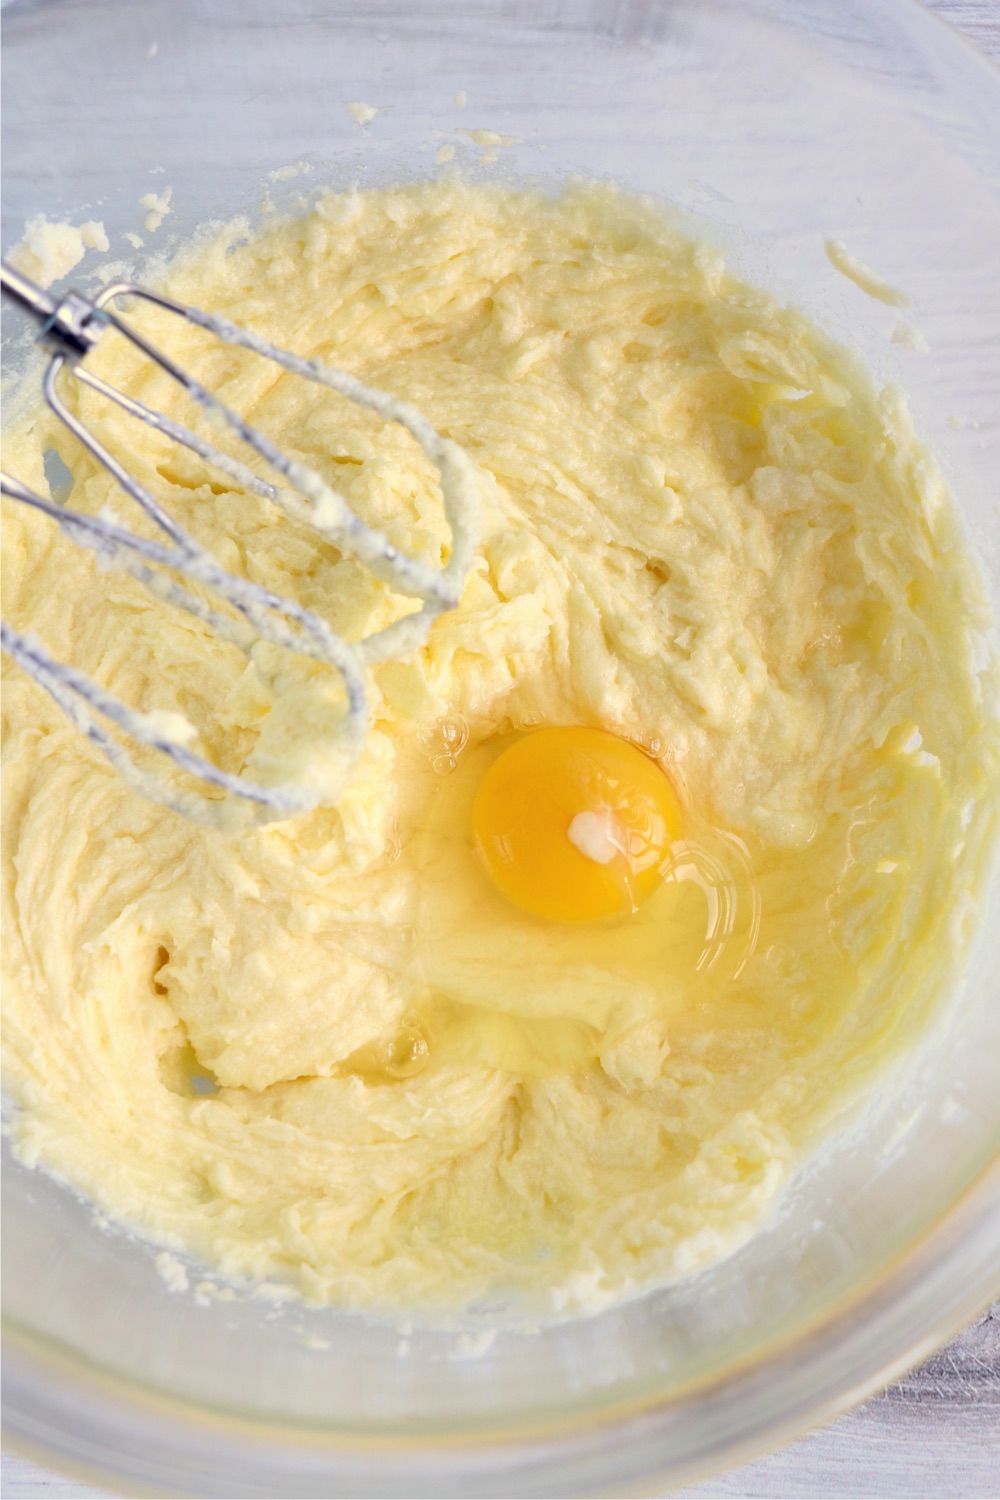 Adding an egg to butter and sugar